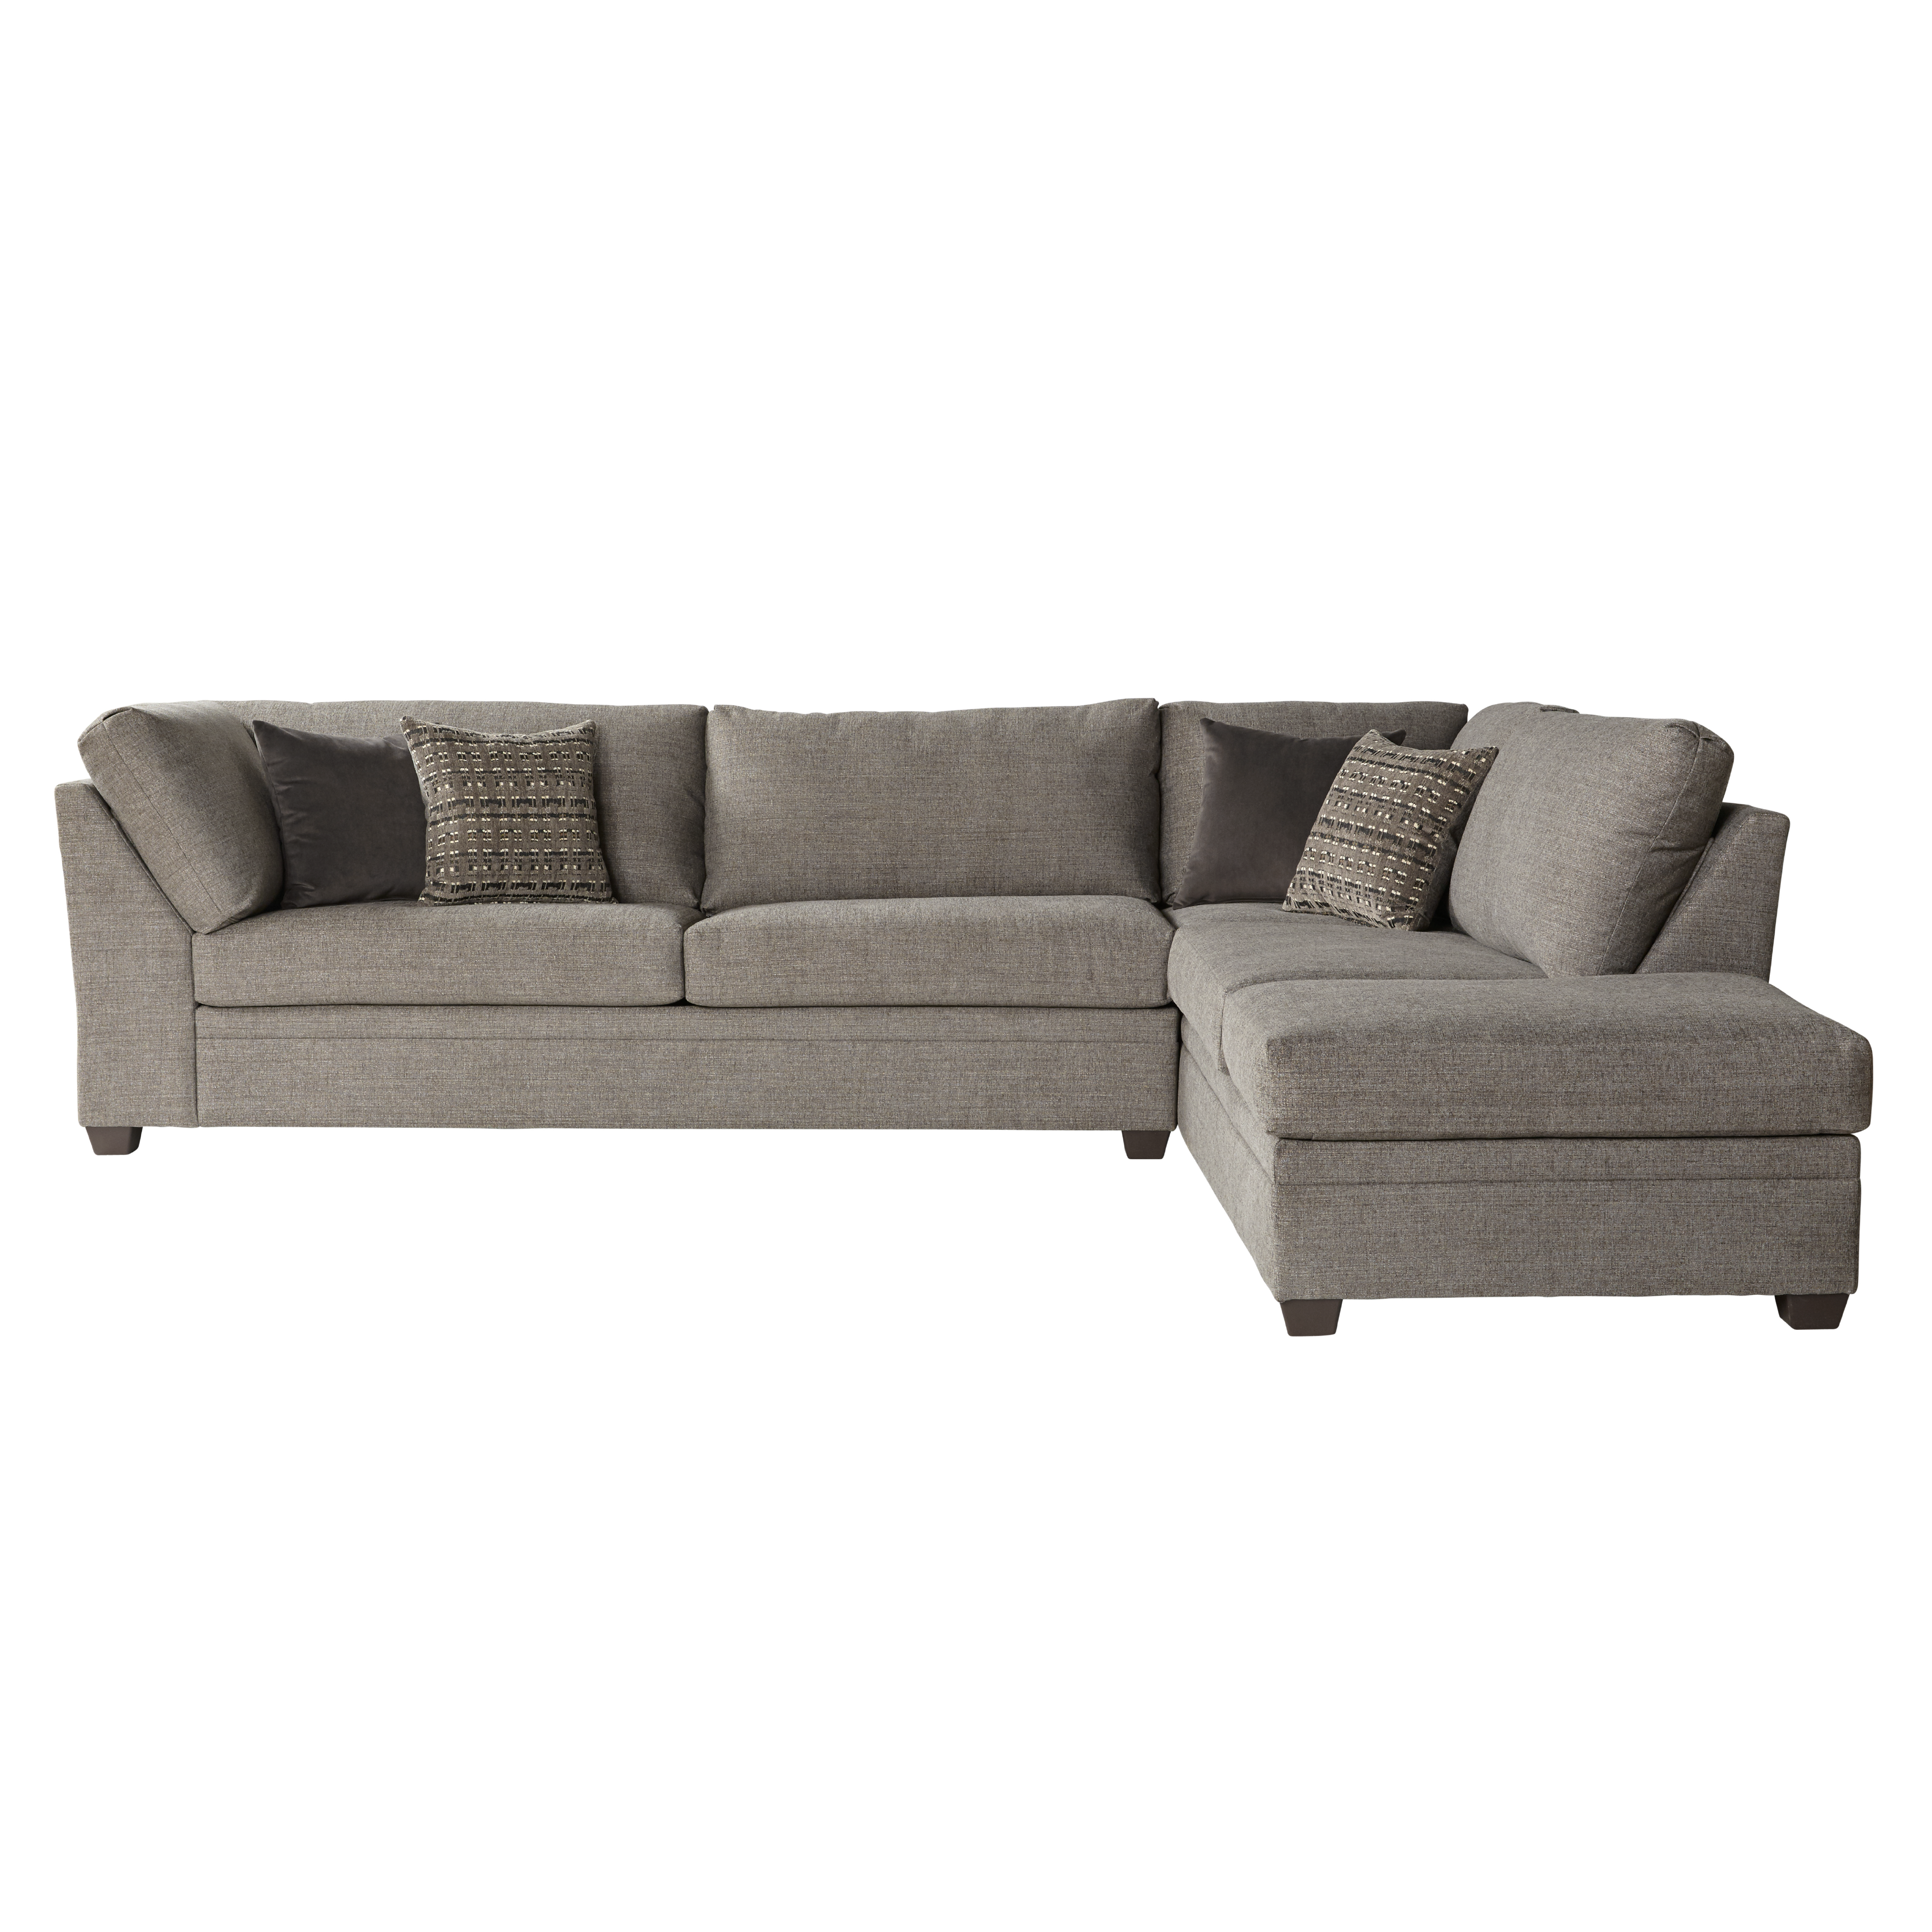 Addington Co Newport Upholstery Fabric Sectional Sofa with Right-Facing Chaise for Living Room, L-Shape, Cement Gray, 6-Seats